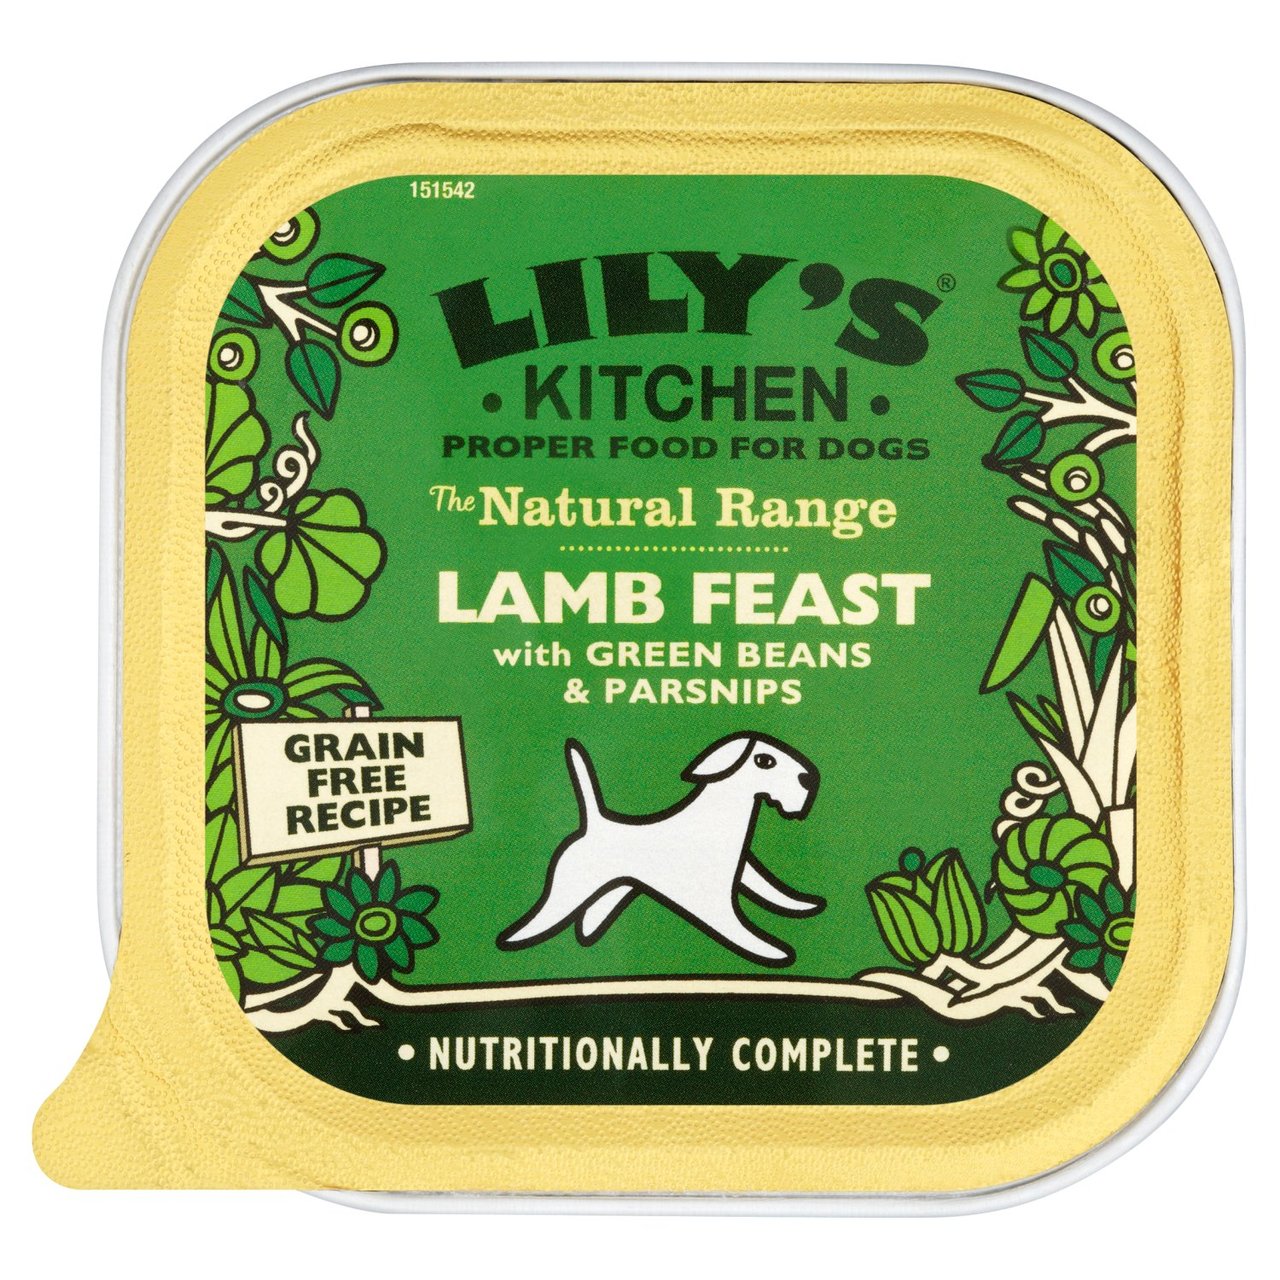 An image of Lily's Kitchen Natural Lamb Feast with Green Beans & Parsnips for Dogs